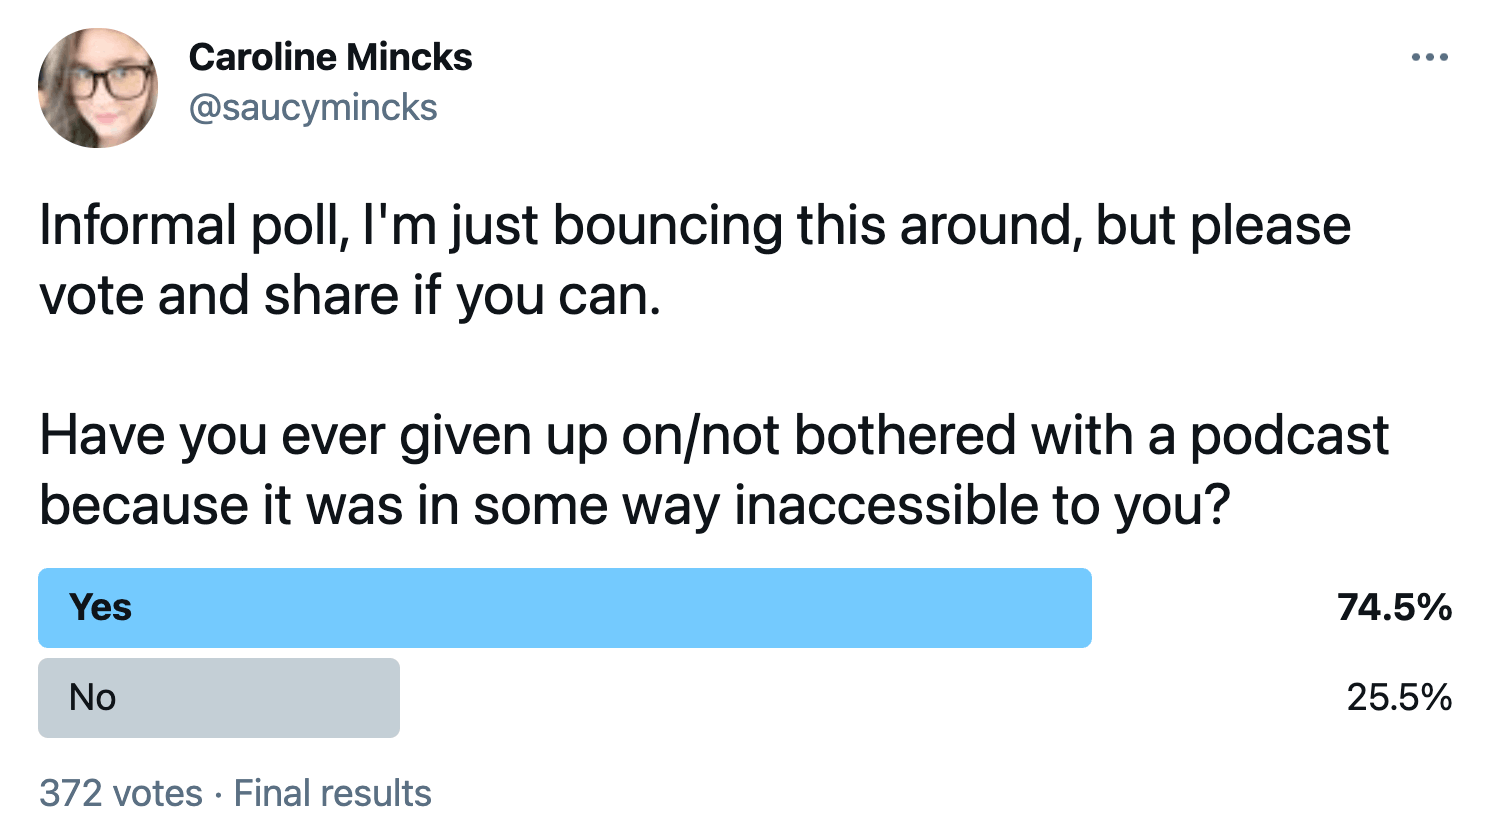 A screenshot of the Twitter poll on Caroline's account. The results show a graph that reveals 74.5% voted yes, and 25.5% voted no.